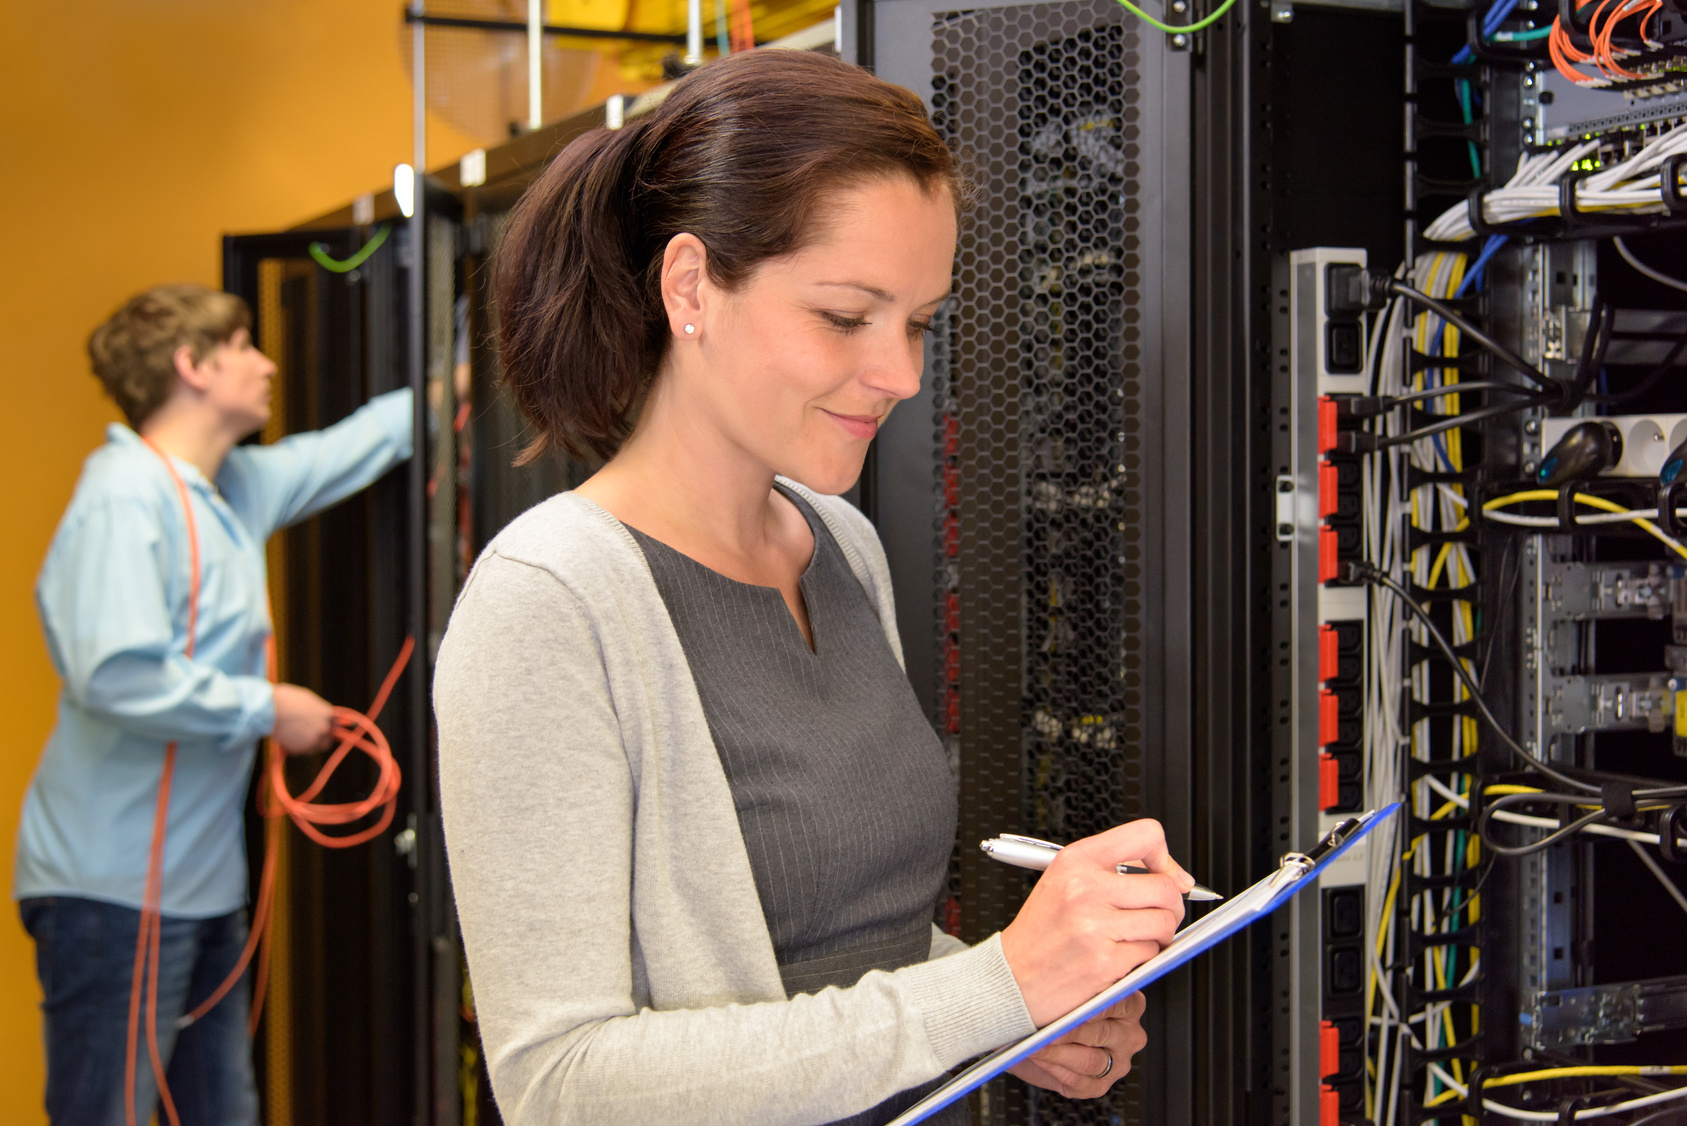 Woman IT engineer in server room checking network